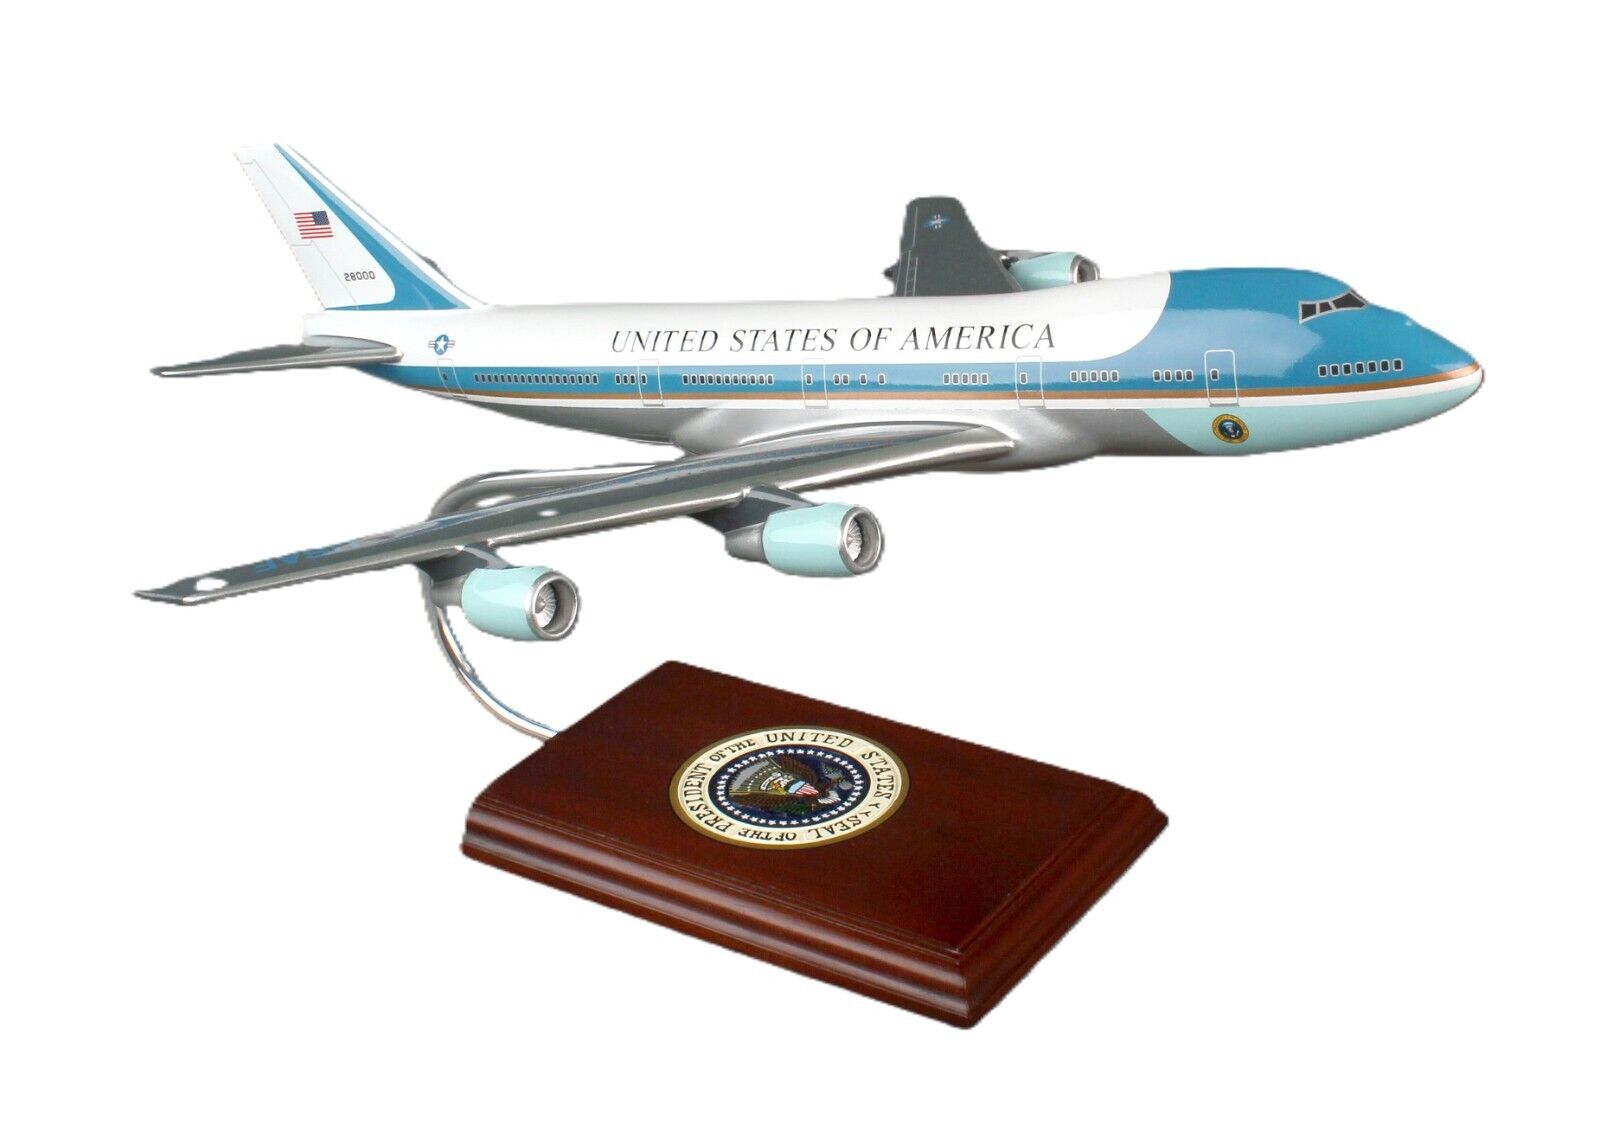 USAF Air Force One Boeing VC-25A 747-200 Desk Display Model 1/144 SC Airplane